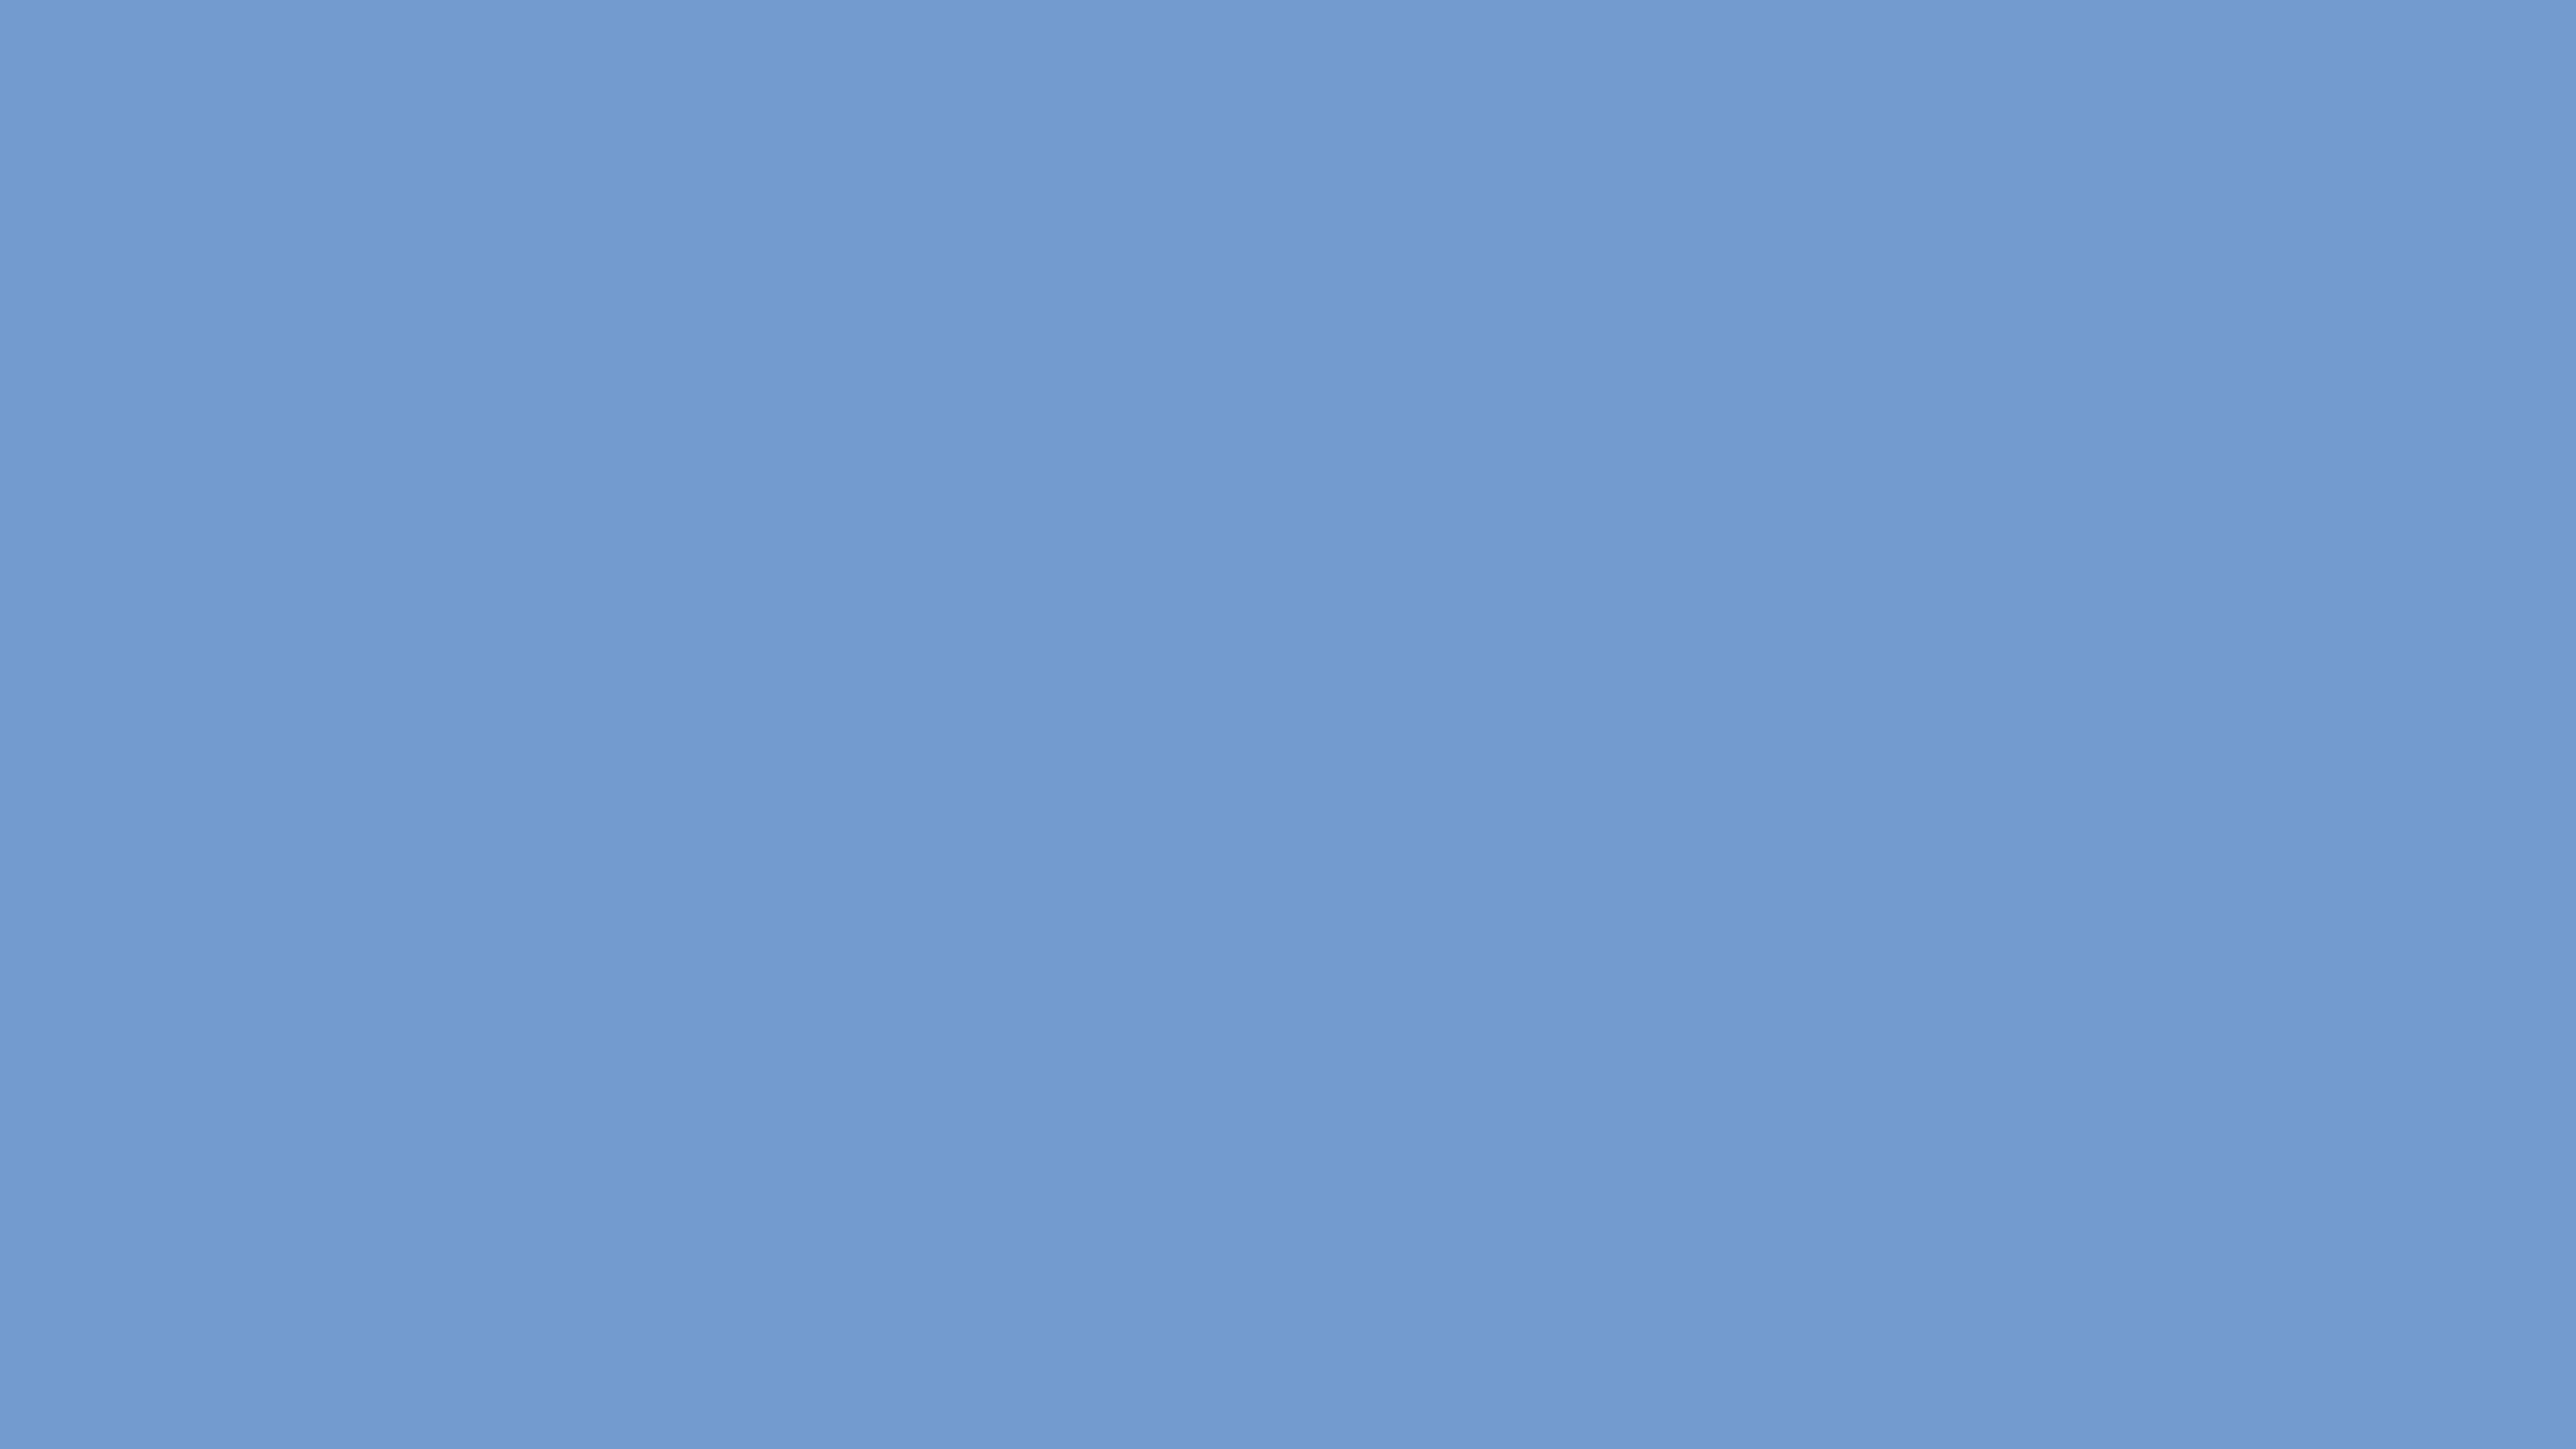 Ice Blue Solid Color Background Image | Free Image Generator